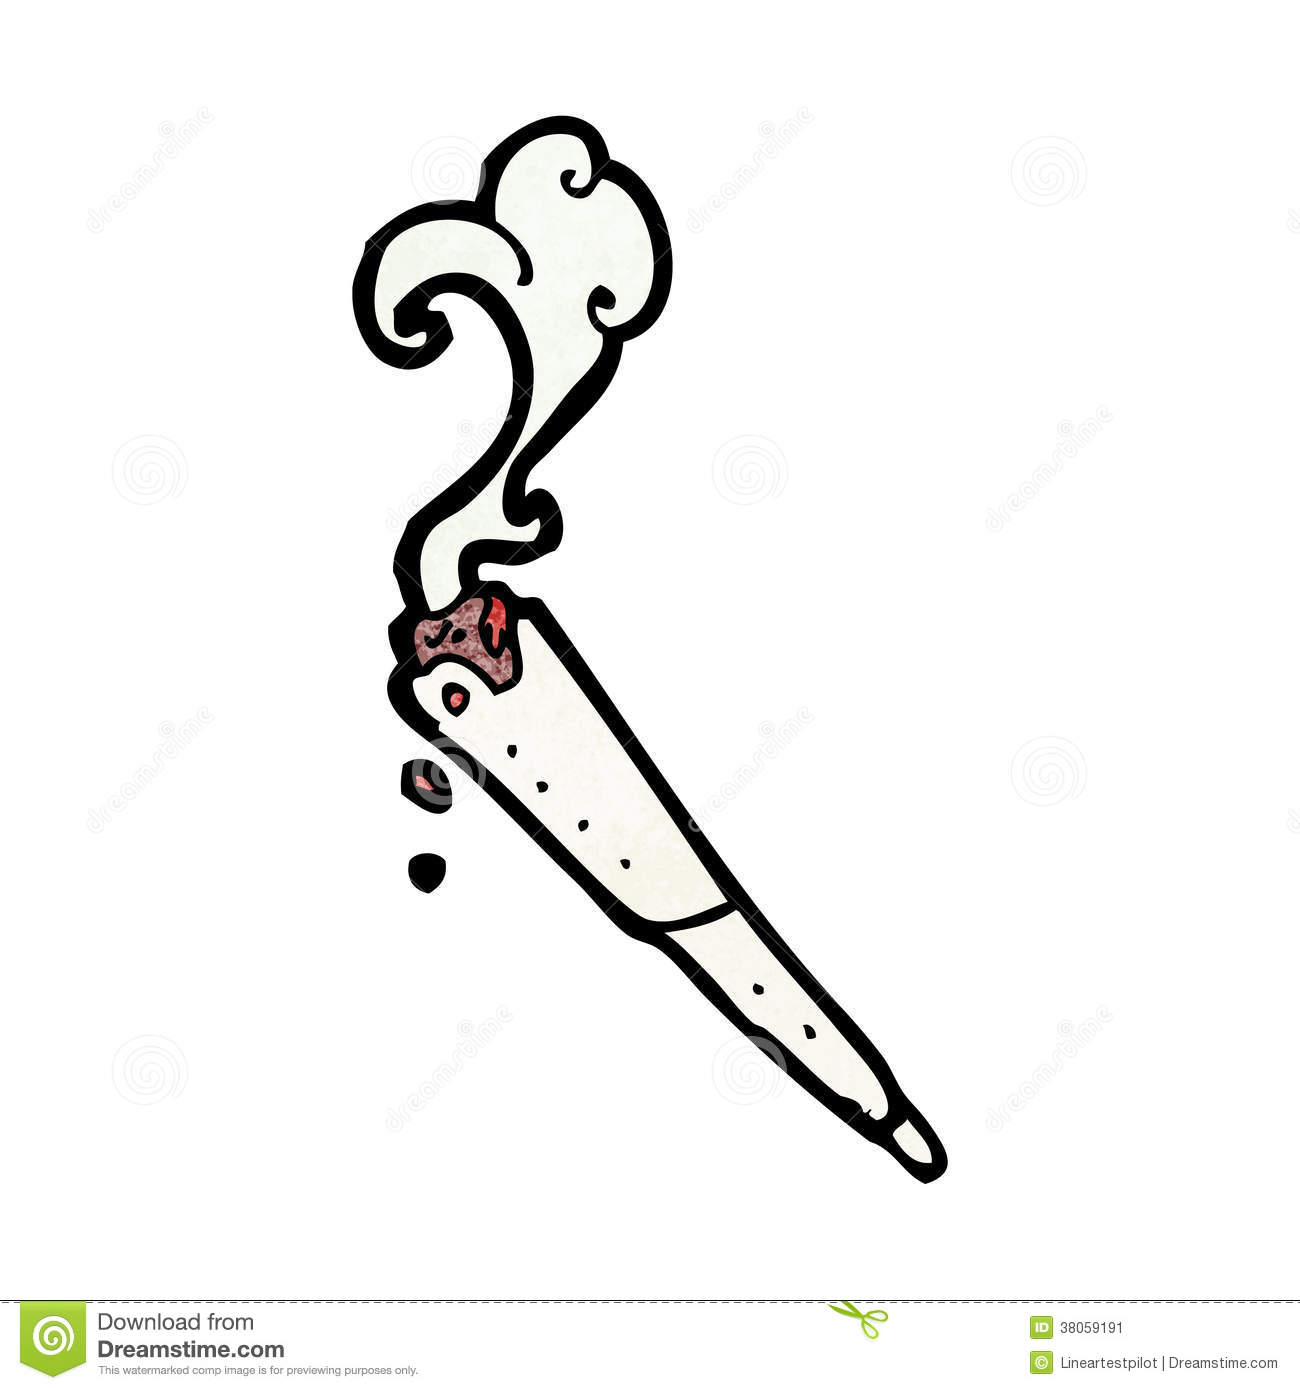 Joint clipart.